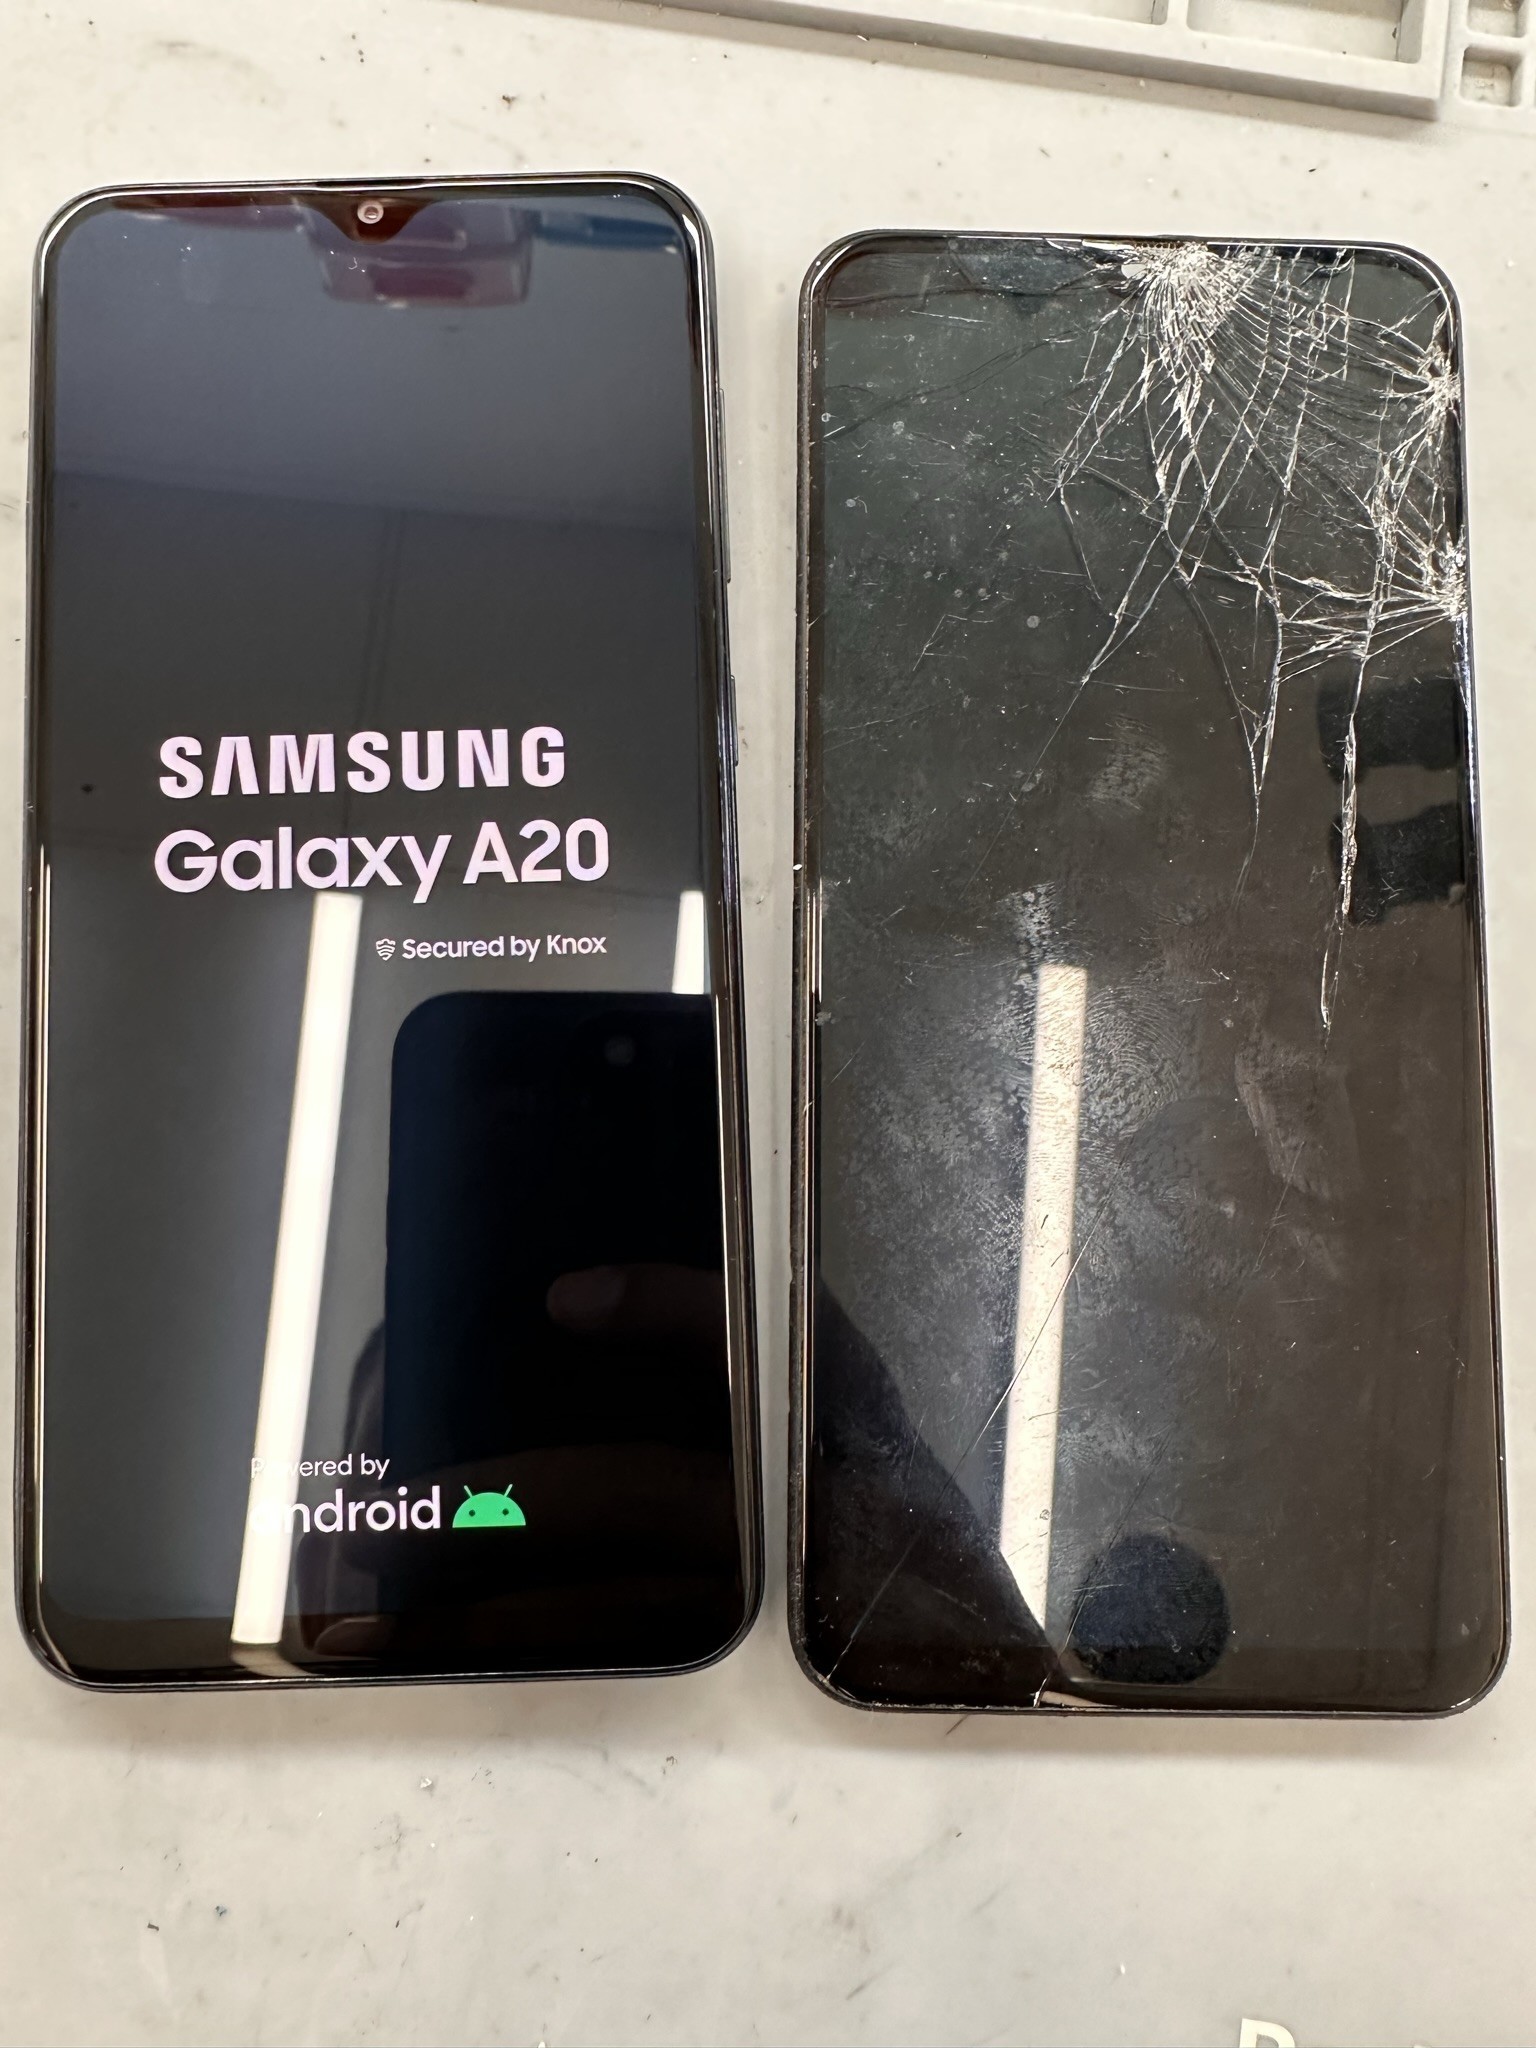 Best Samsung Mobile Repair shop in Box hill and Schofield TechCity Rep